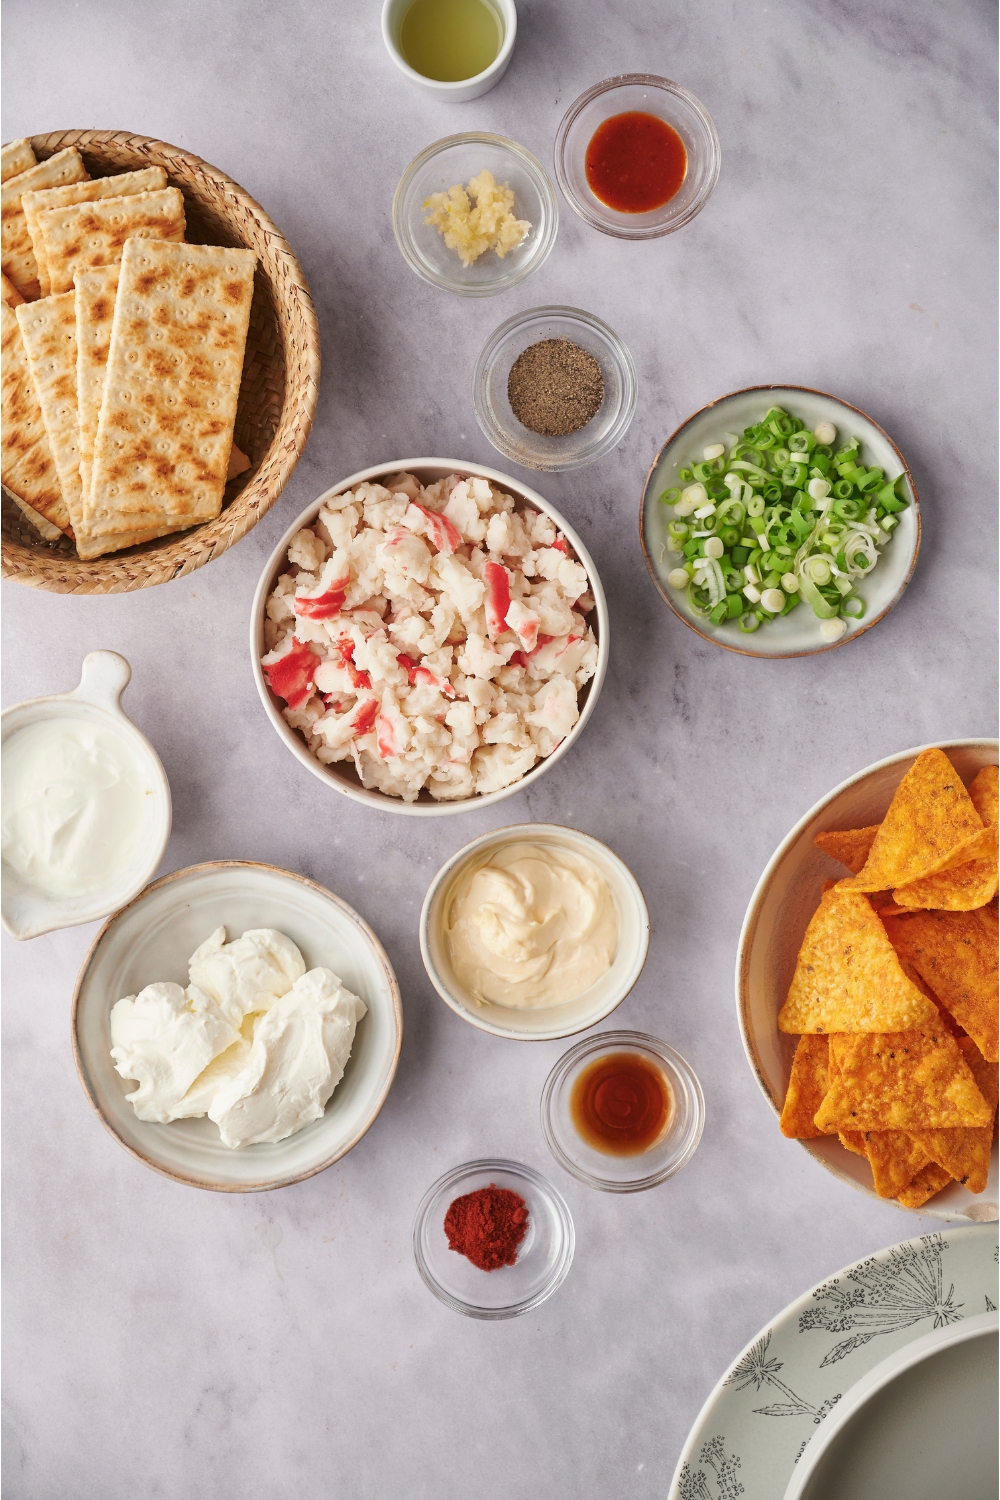 An assortment of ingredients including bowls of chopped crab, diced green onion, mayonnaise, sour cream, cream cheese, spices, crackers, and tortilla chips.